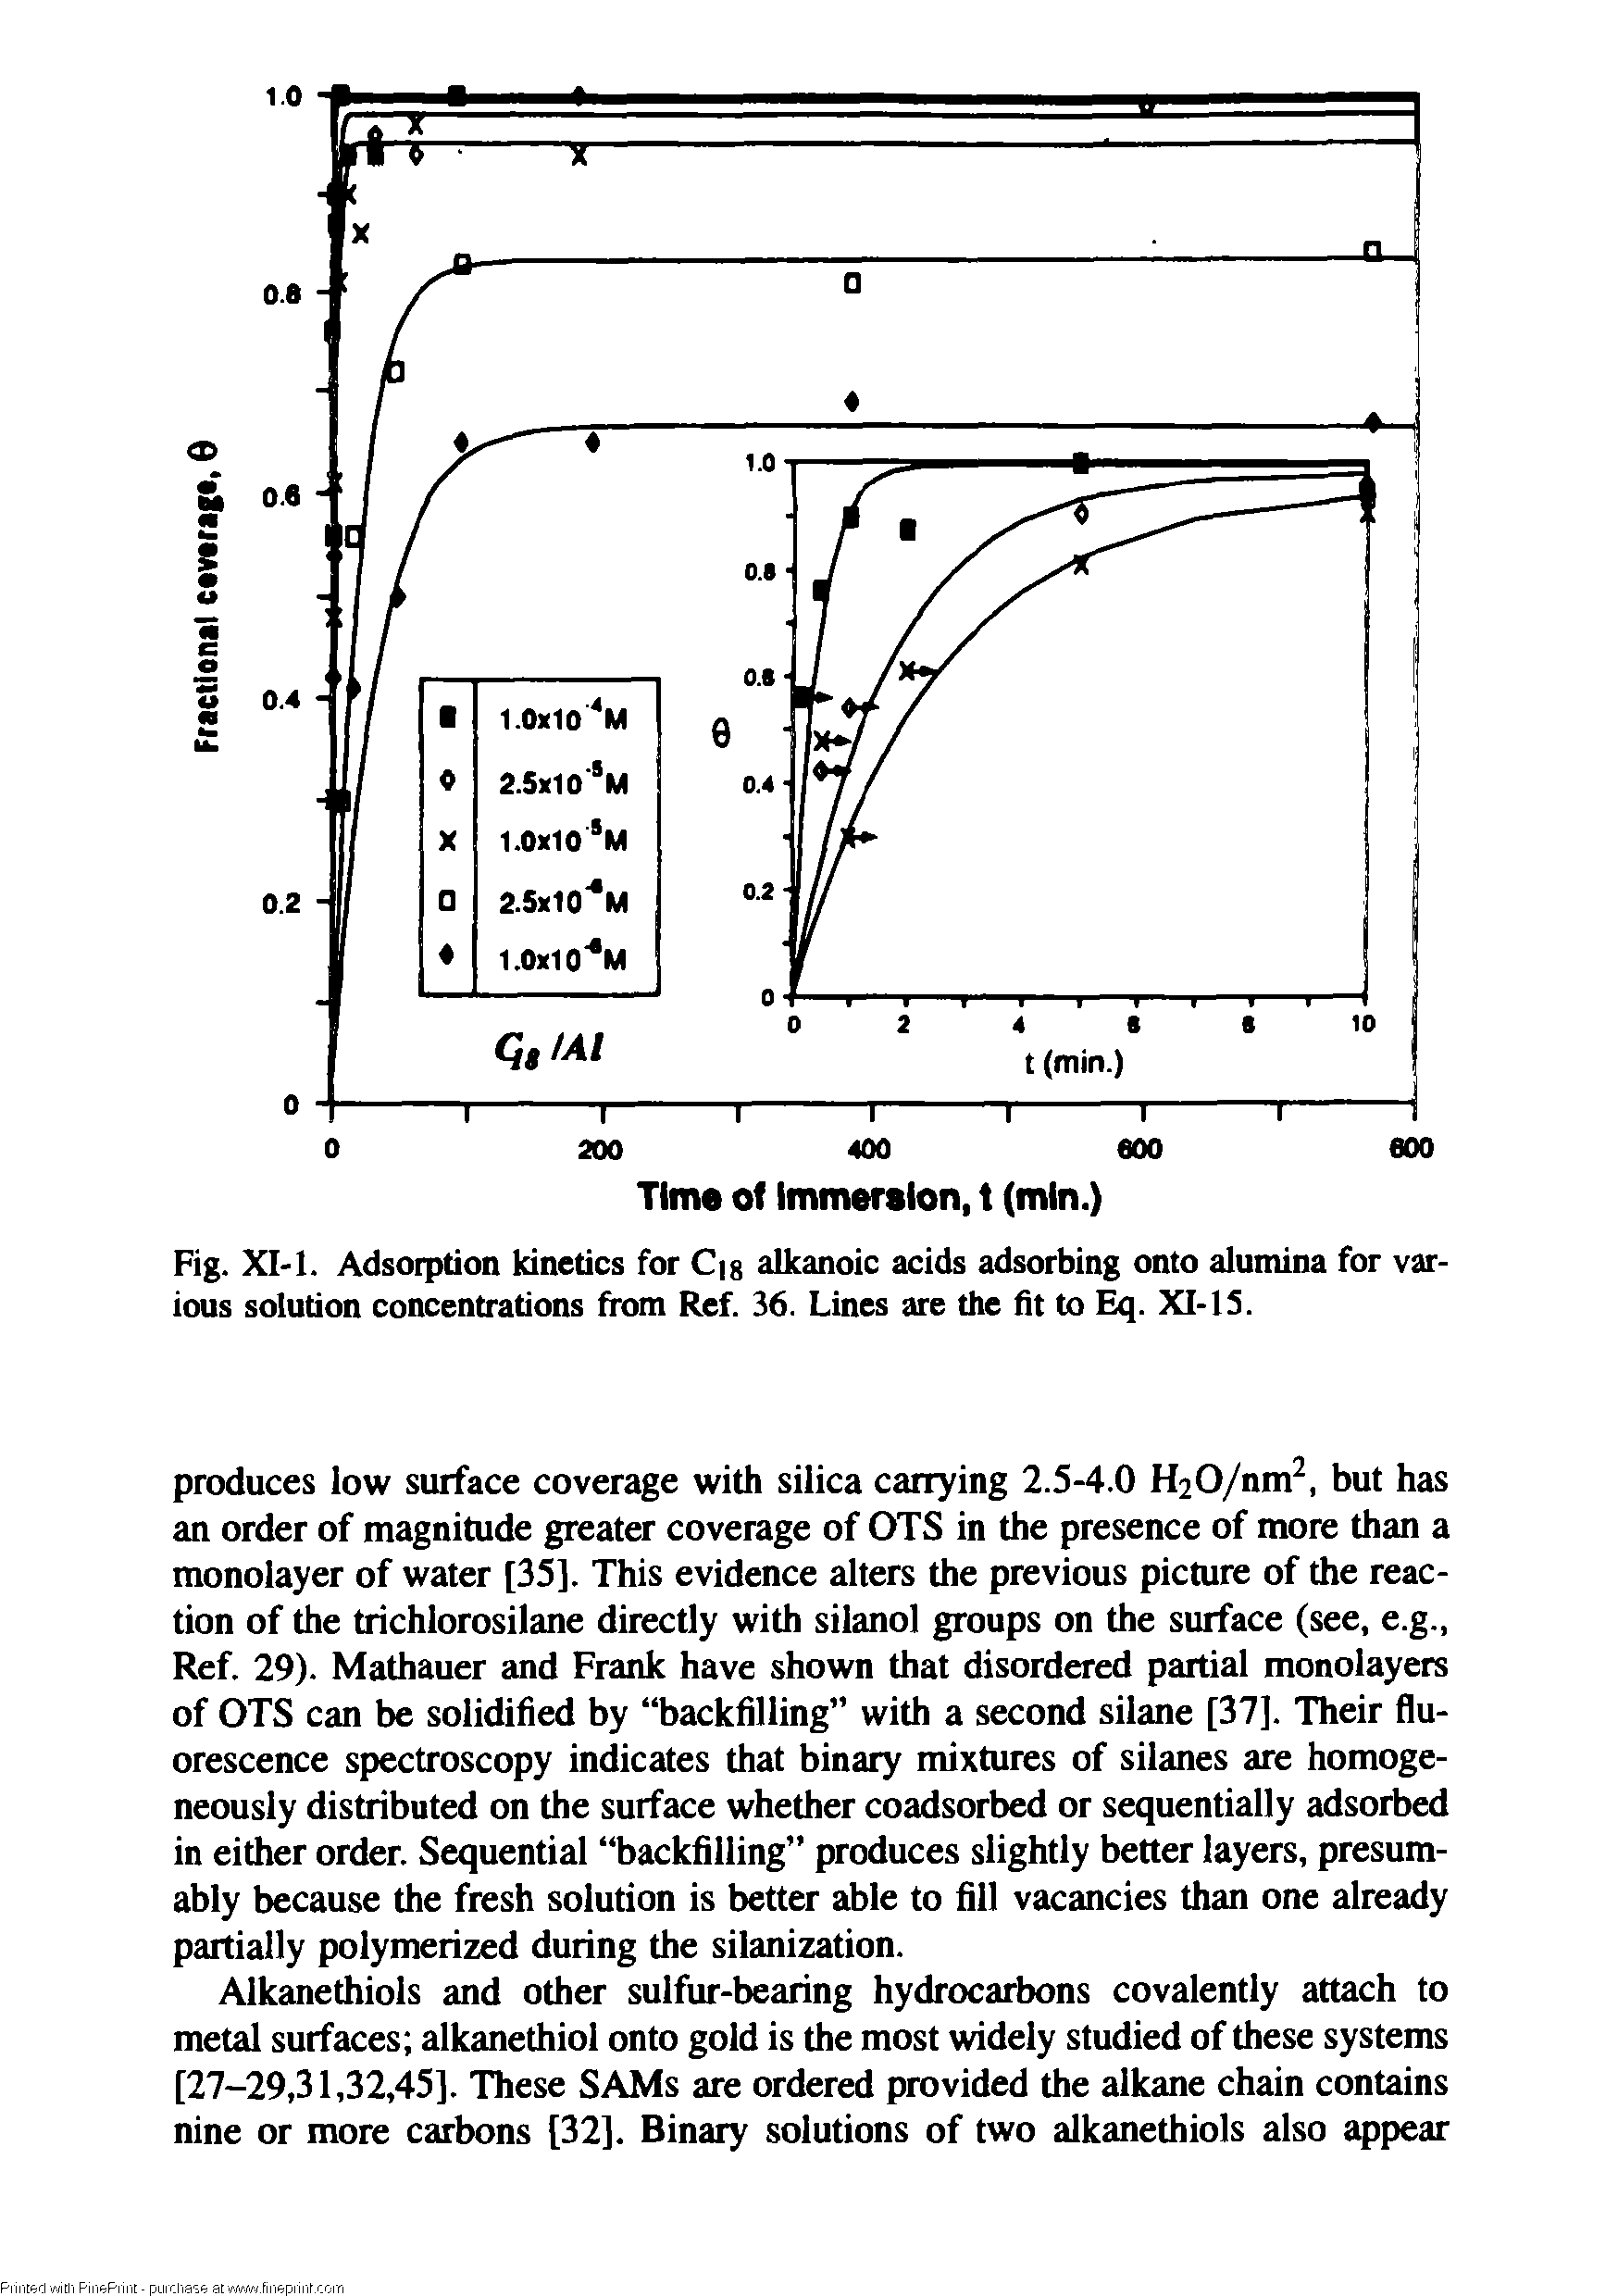 Fig. XI-1. Adsorption kinetics for C g alkanoic acids adsorbing onto alumina for various solution concentrations from Ref. 36. Lines are the fit to Eq. XI-IS.